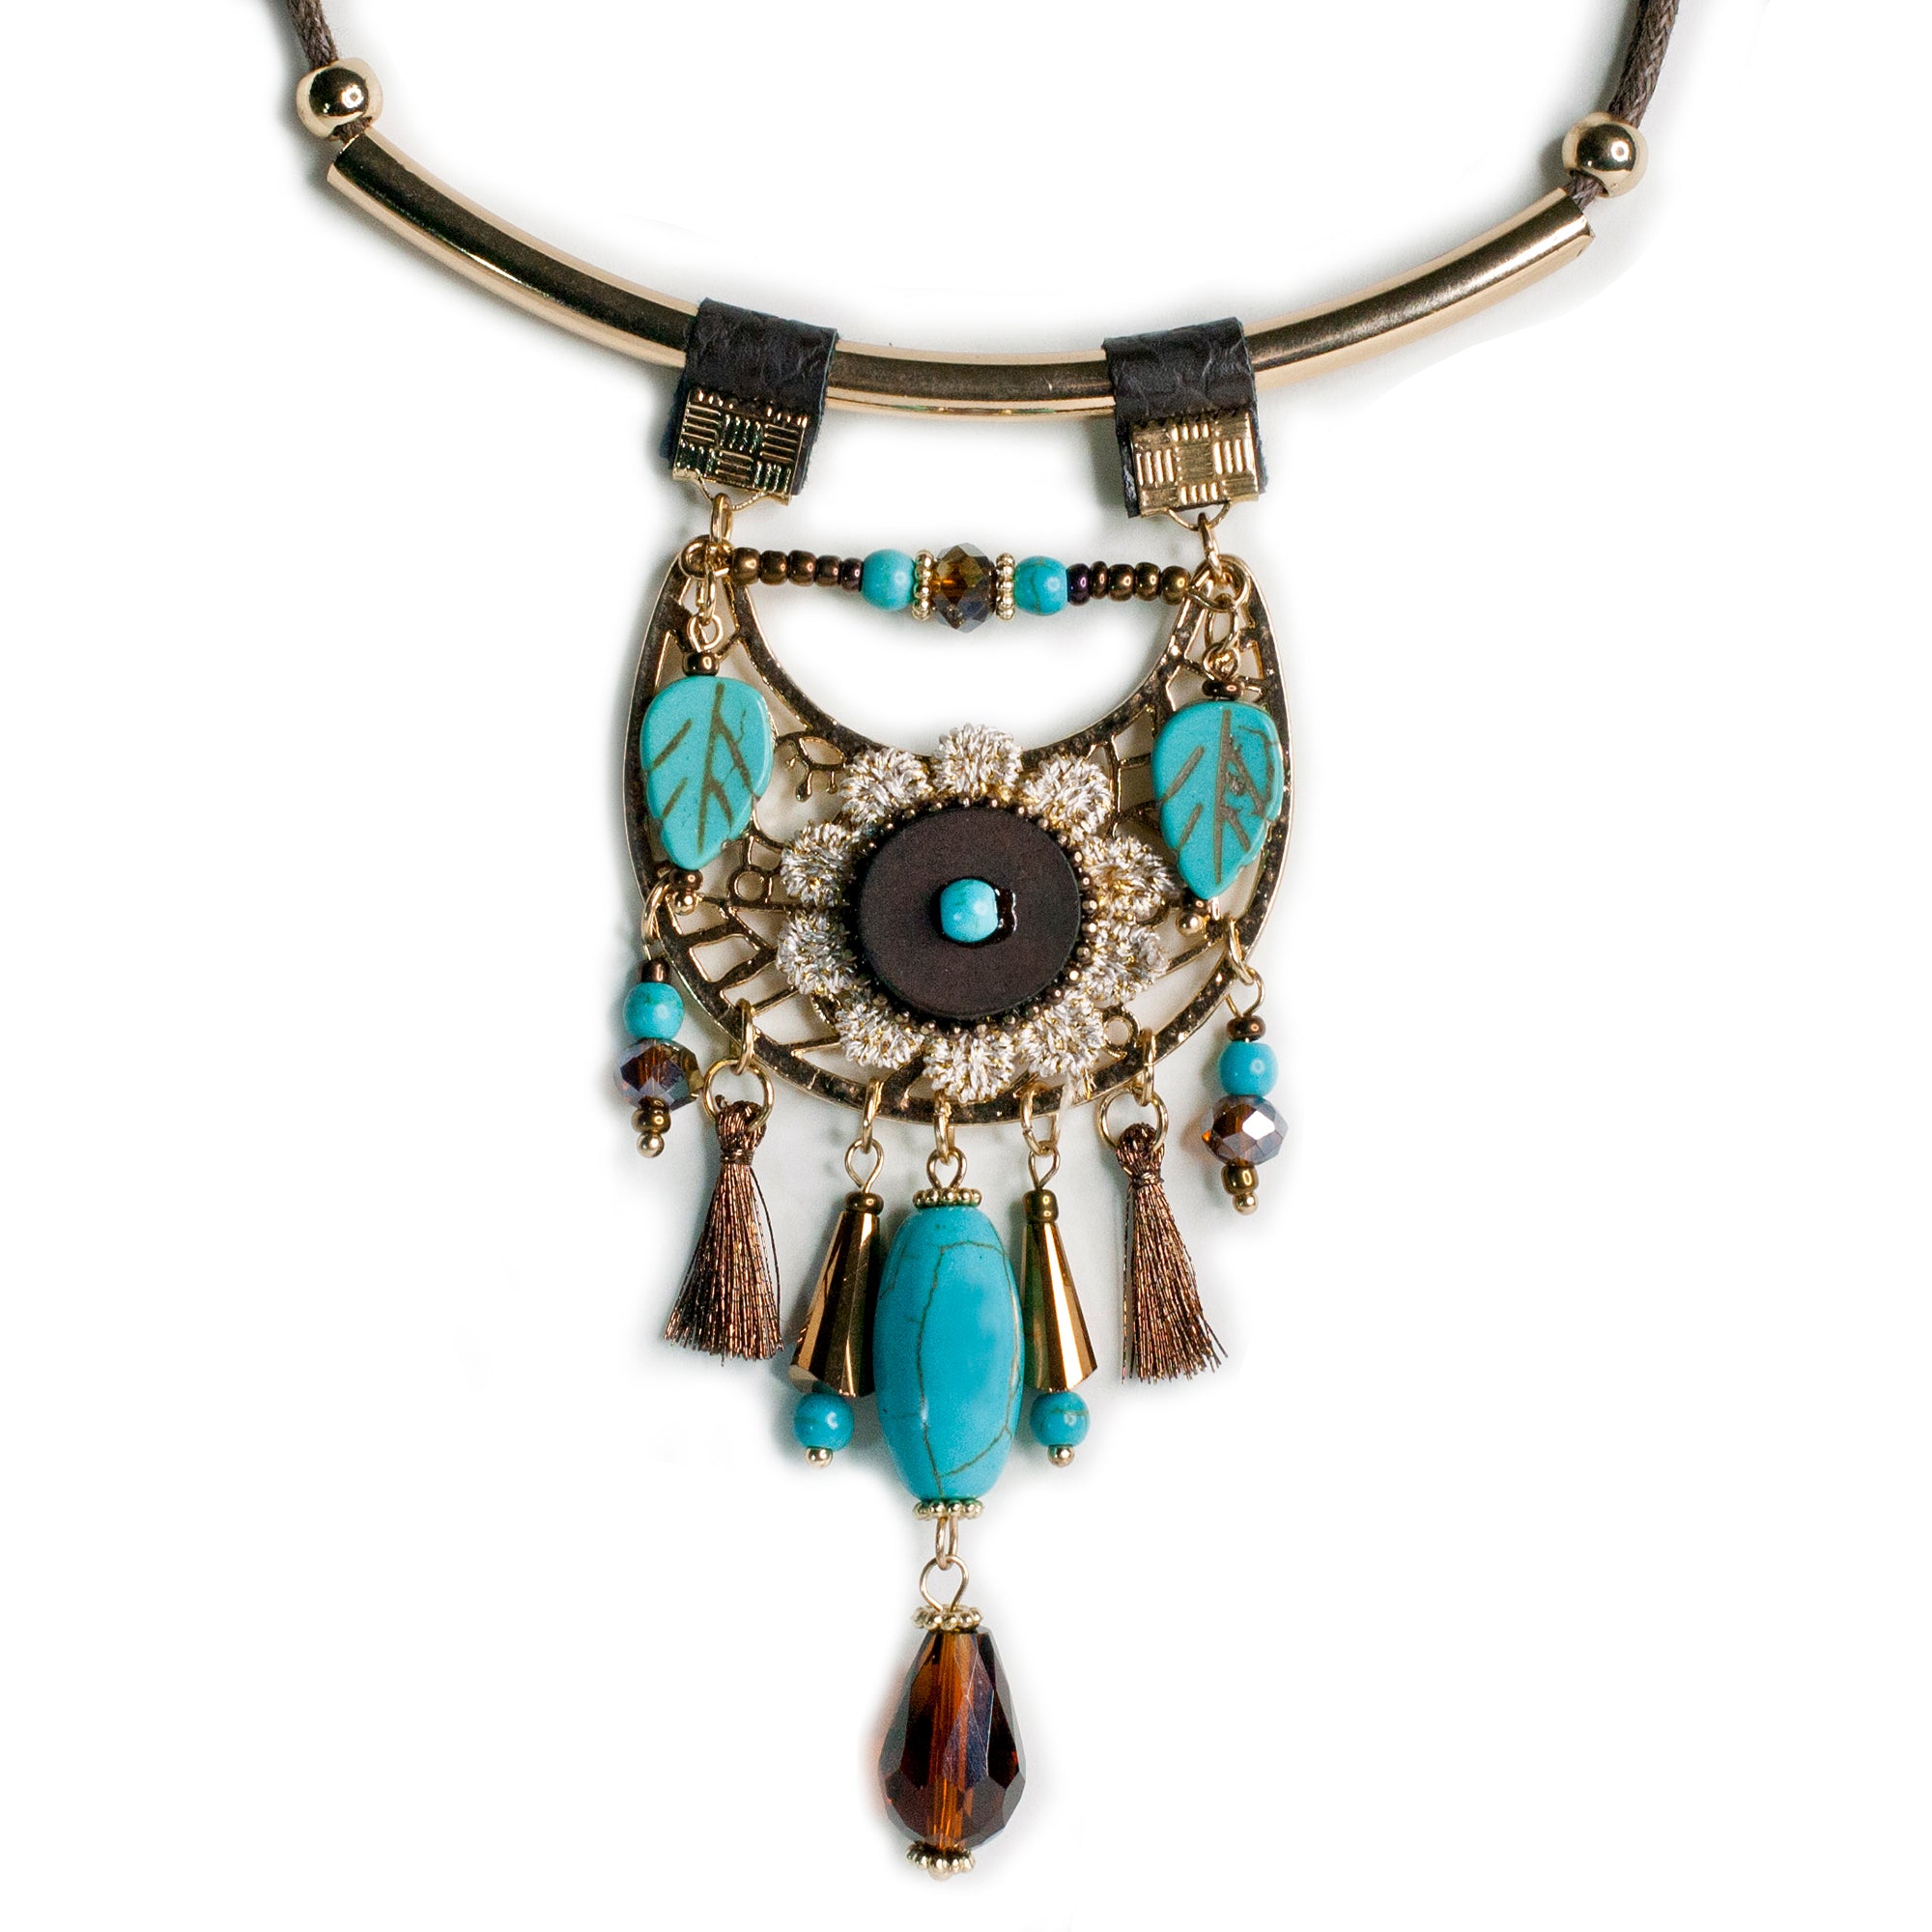  Soul Statement Vintage Country Western Jewelry for Women: Boho  Turquoise & Bronze Patina with Long Copper Tassel Chains